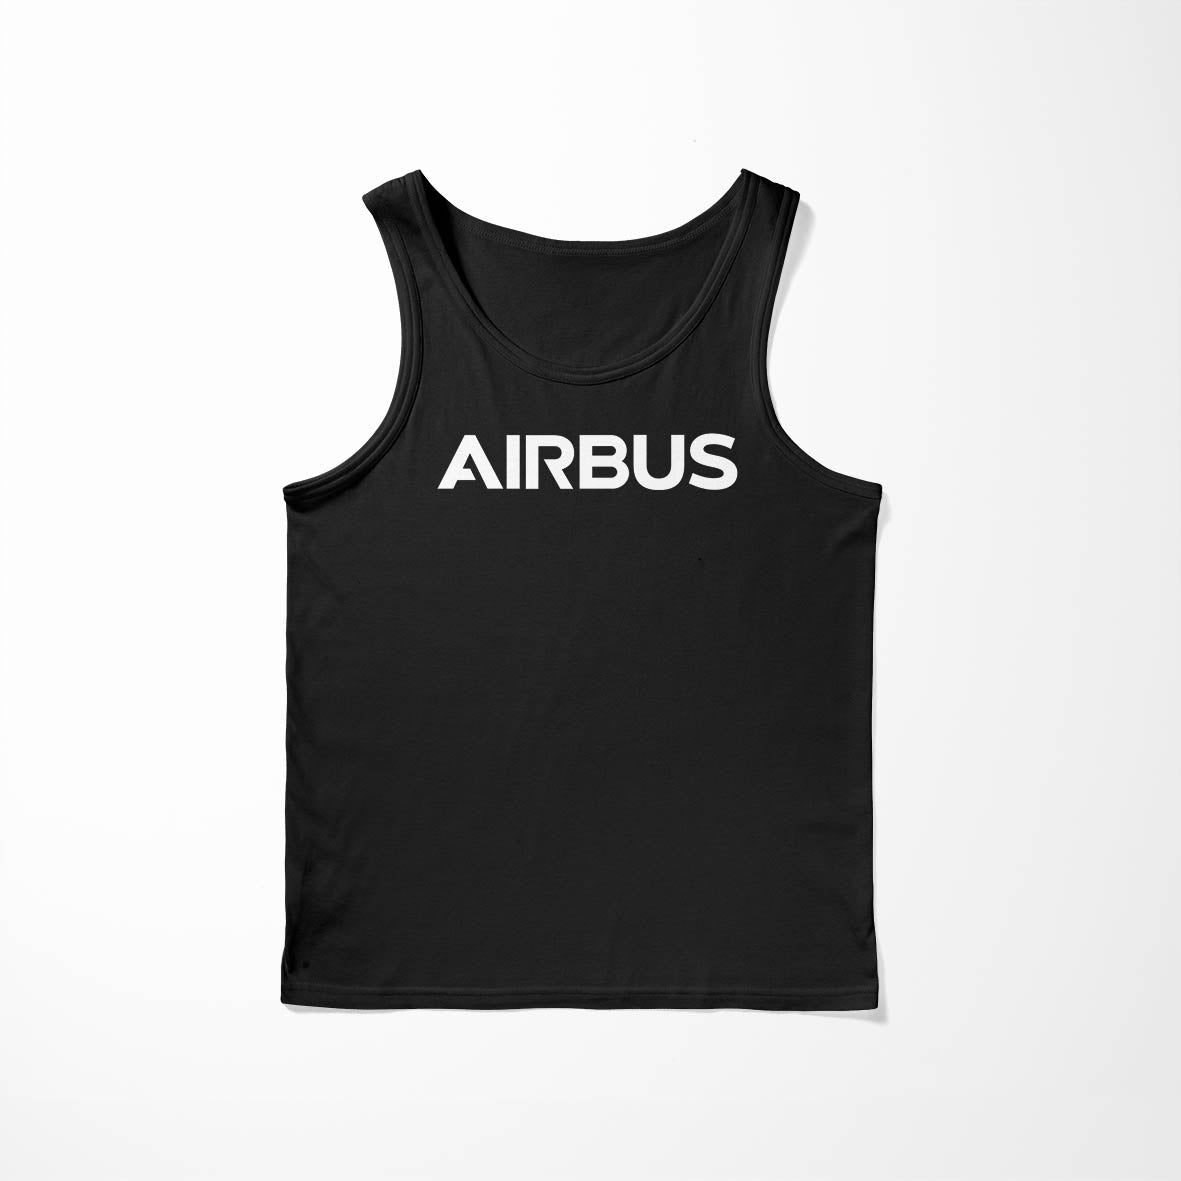 Airbus & Text Designed Tank Tops